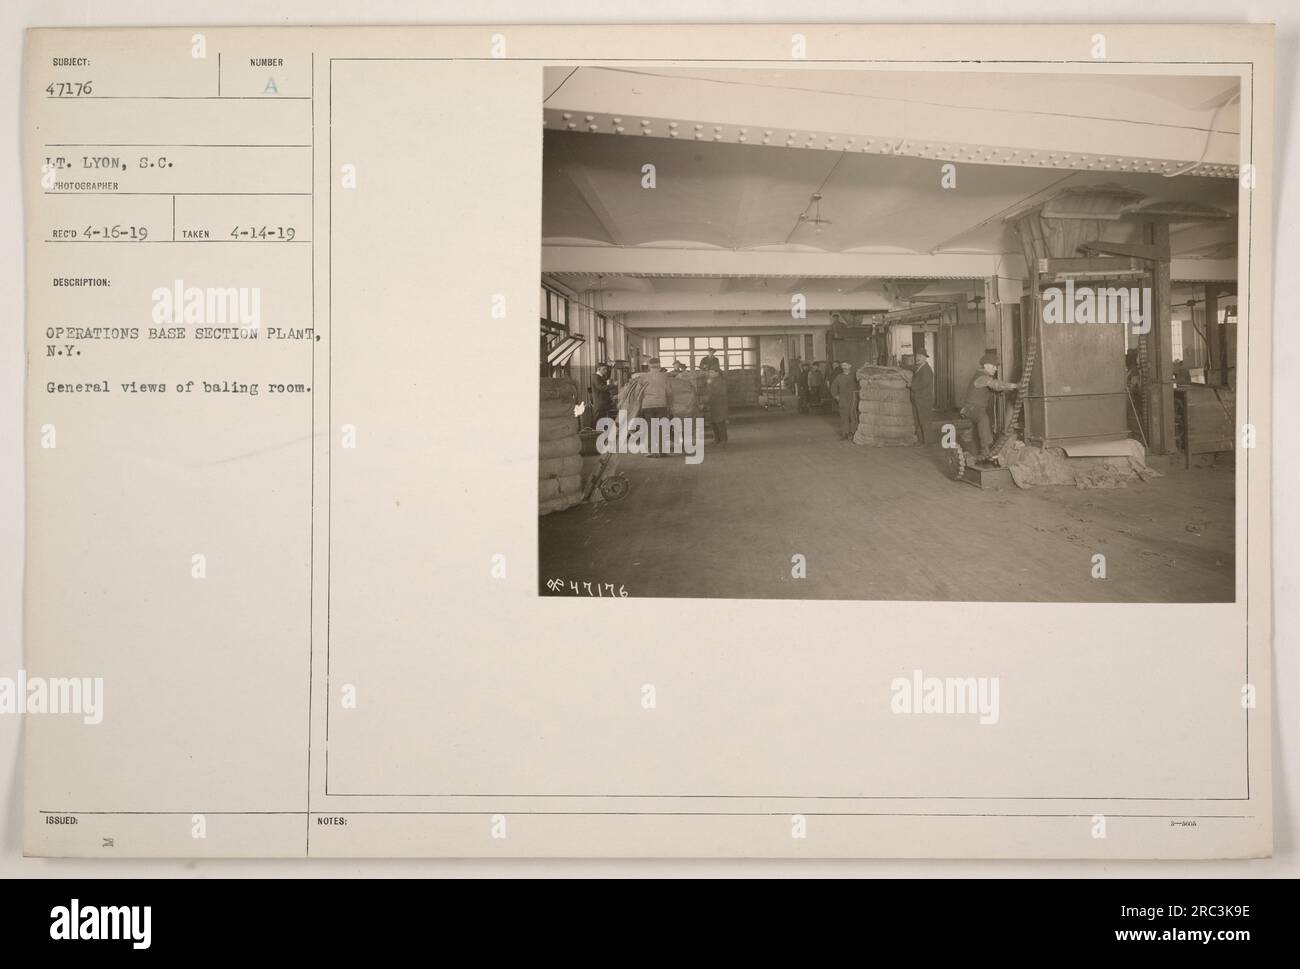 General view of the baling room at Operations Base Section Plant in New York. This photograph, taken on April 14, 1919, by Lieutenant Lyon, shows the room where baling activities were carried out. The image has the subj ect number 47176 and was received on April 16, 1919. Stock Photo